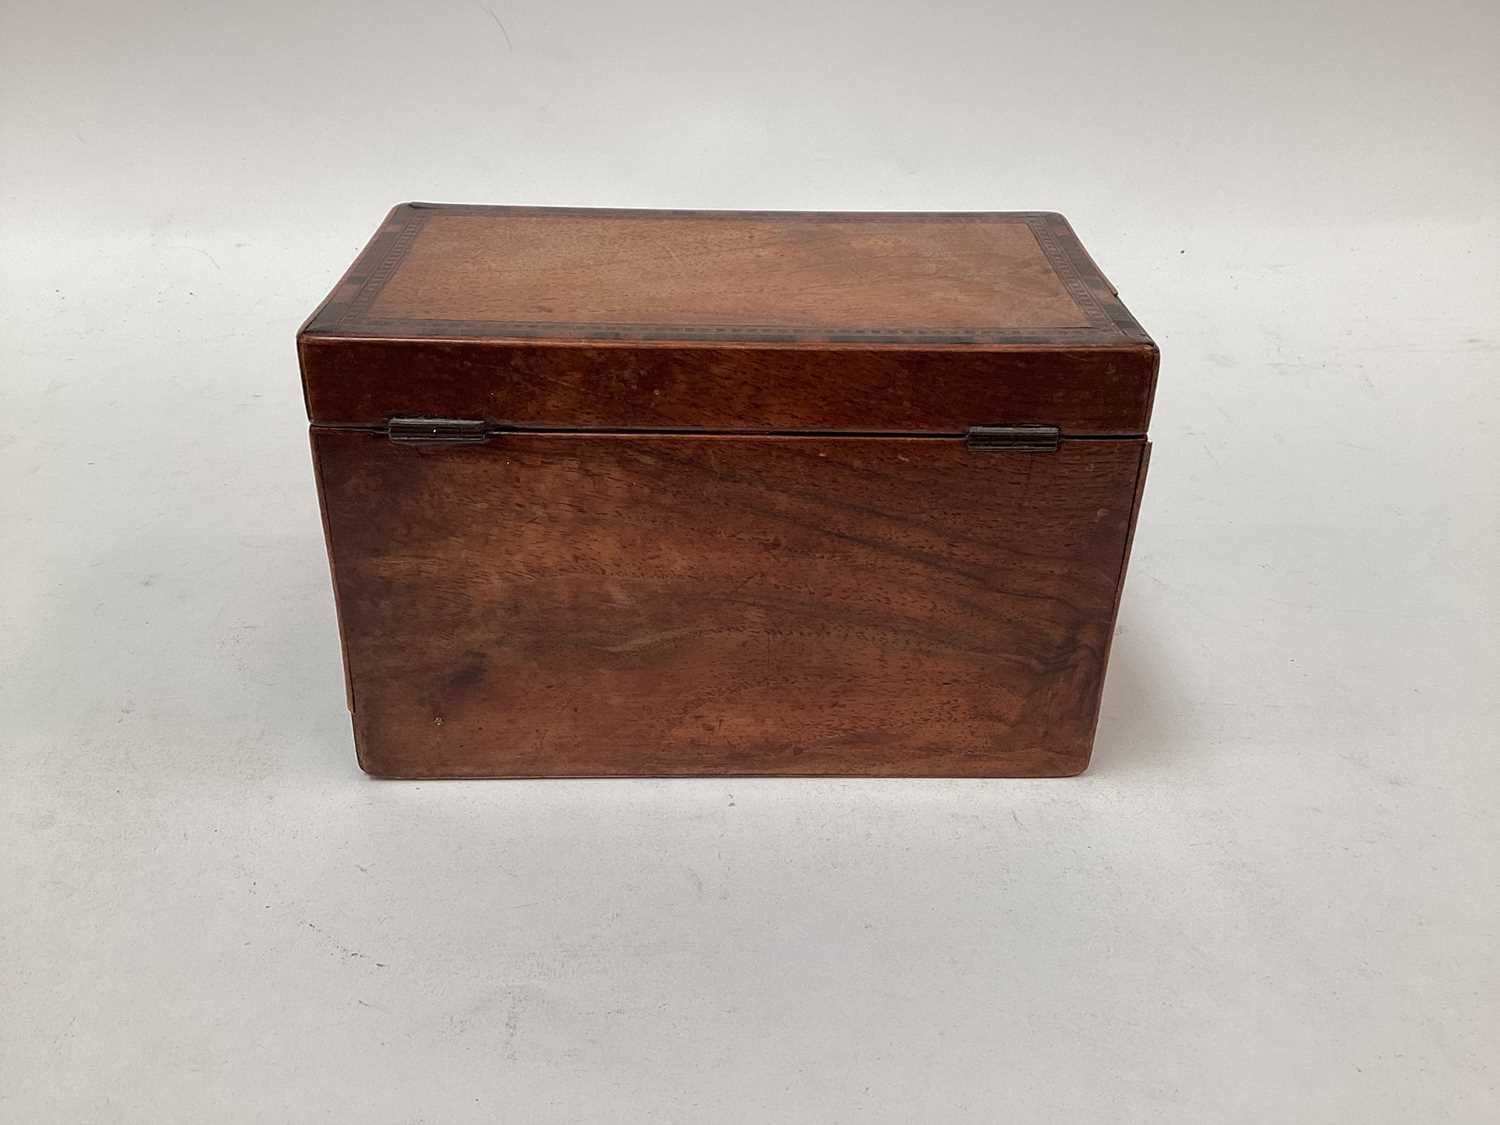 Victorian walnut tea caddy with banded decoration to edges, two-division interior, 18cm wide - Image 4 of 8